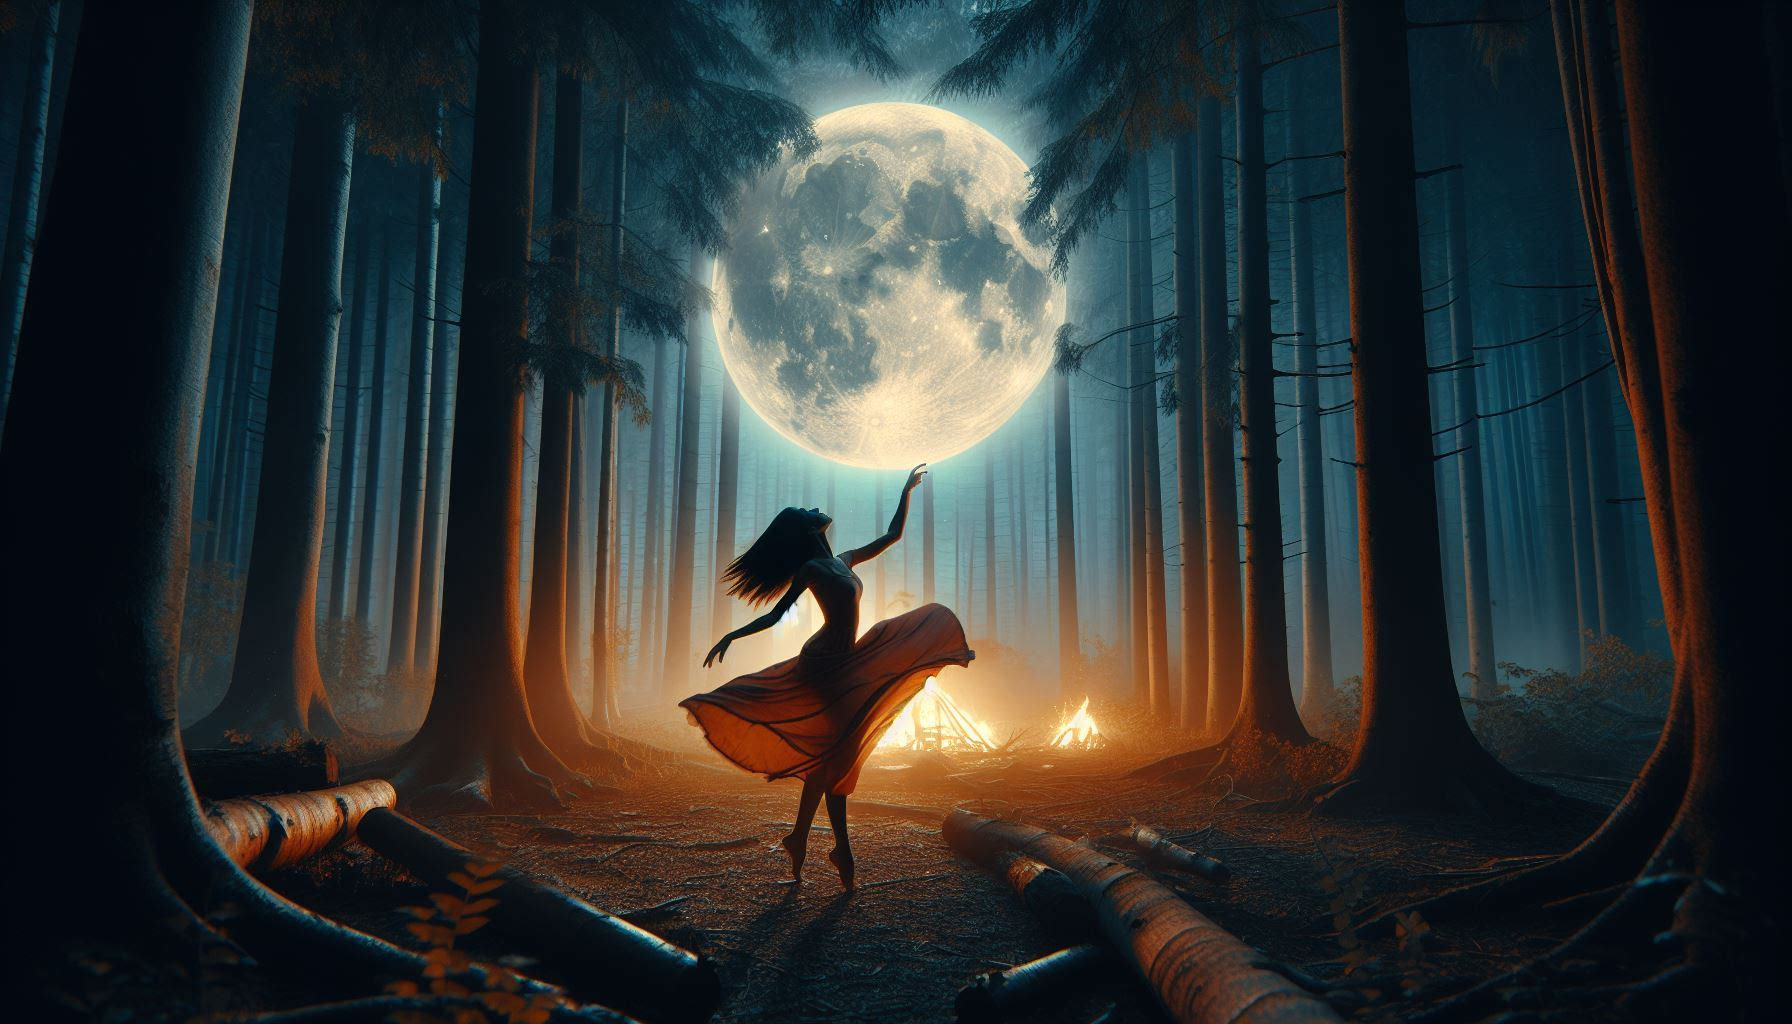 Silhouette of a woman dancing in front of a photo-realistic moon much larger than her